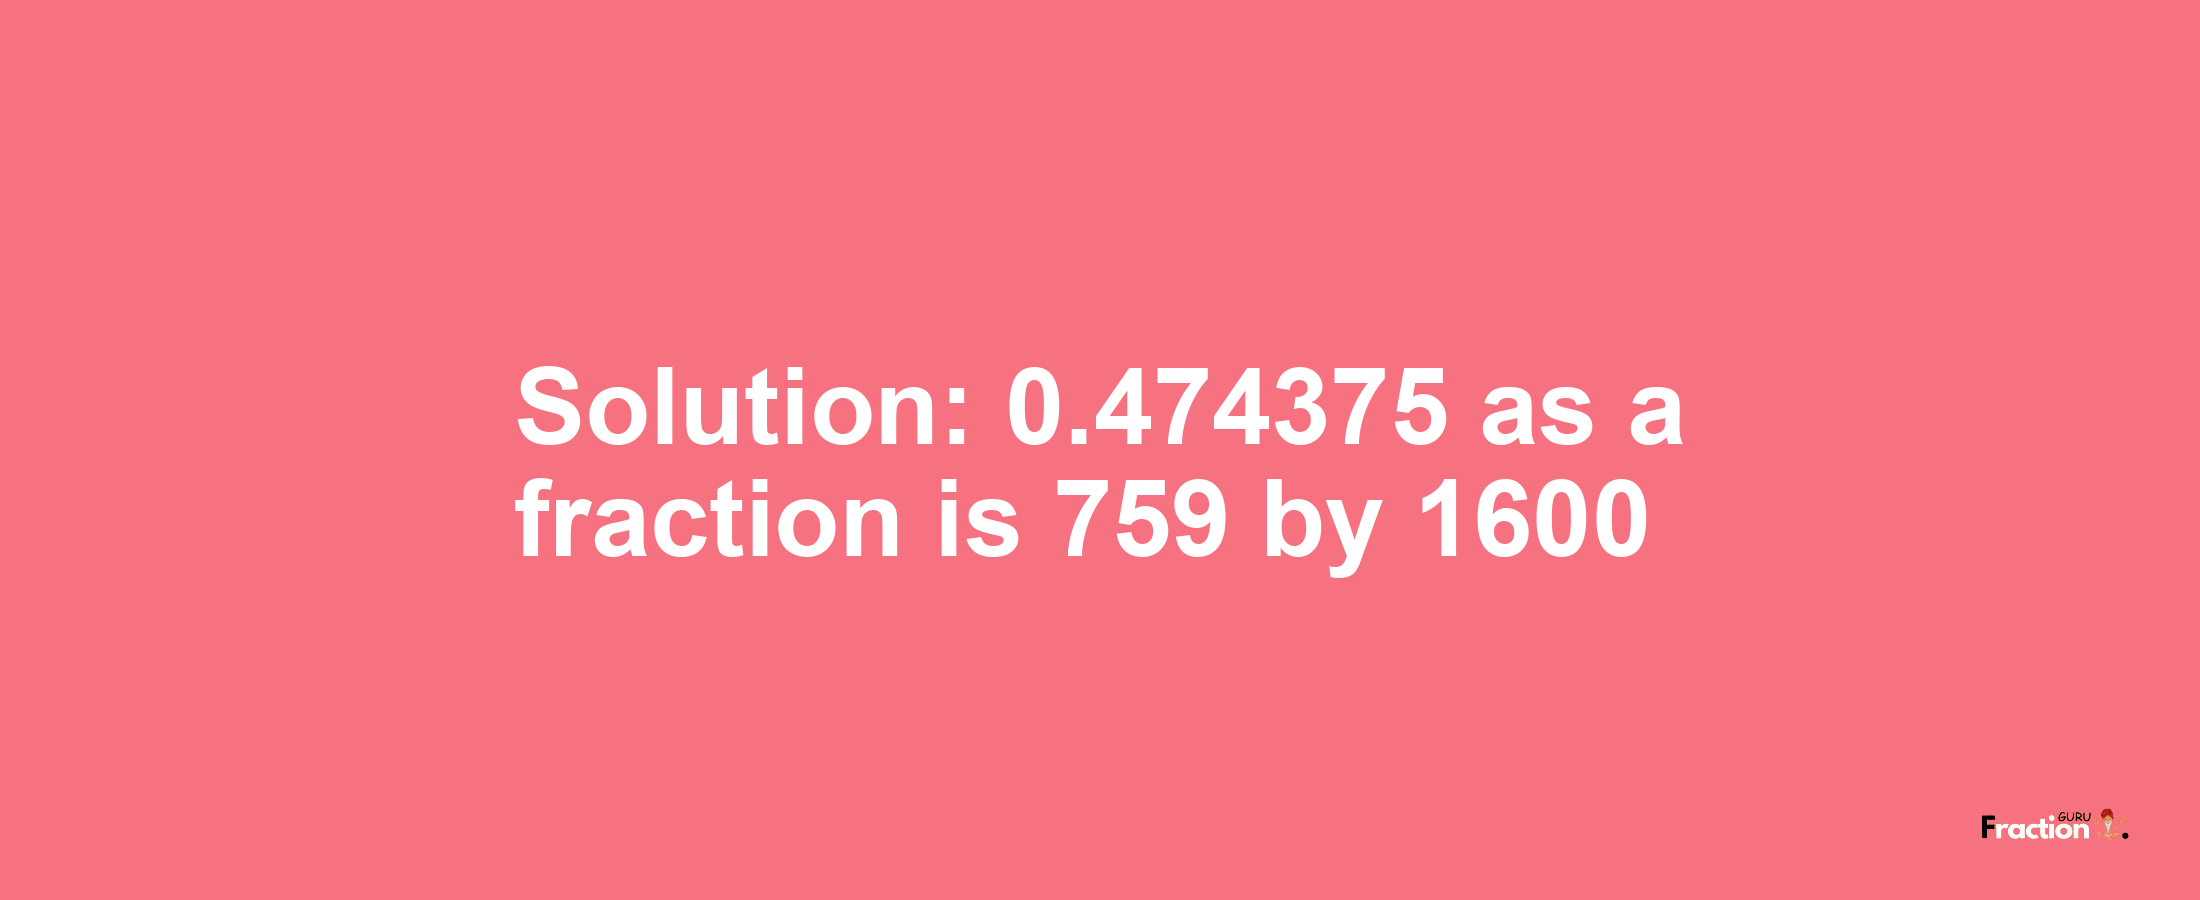 Solution:0.474375 as a fraction is 759/1600